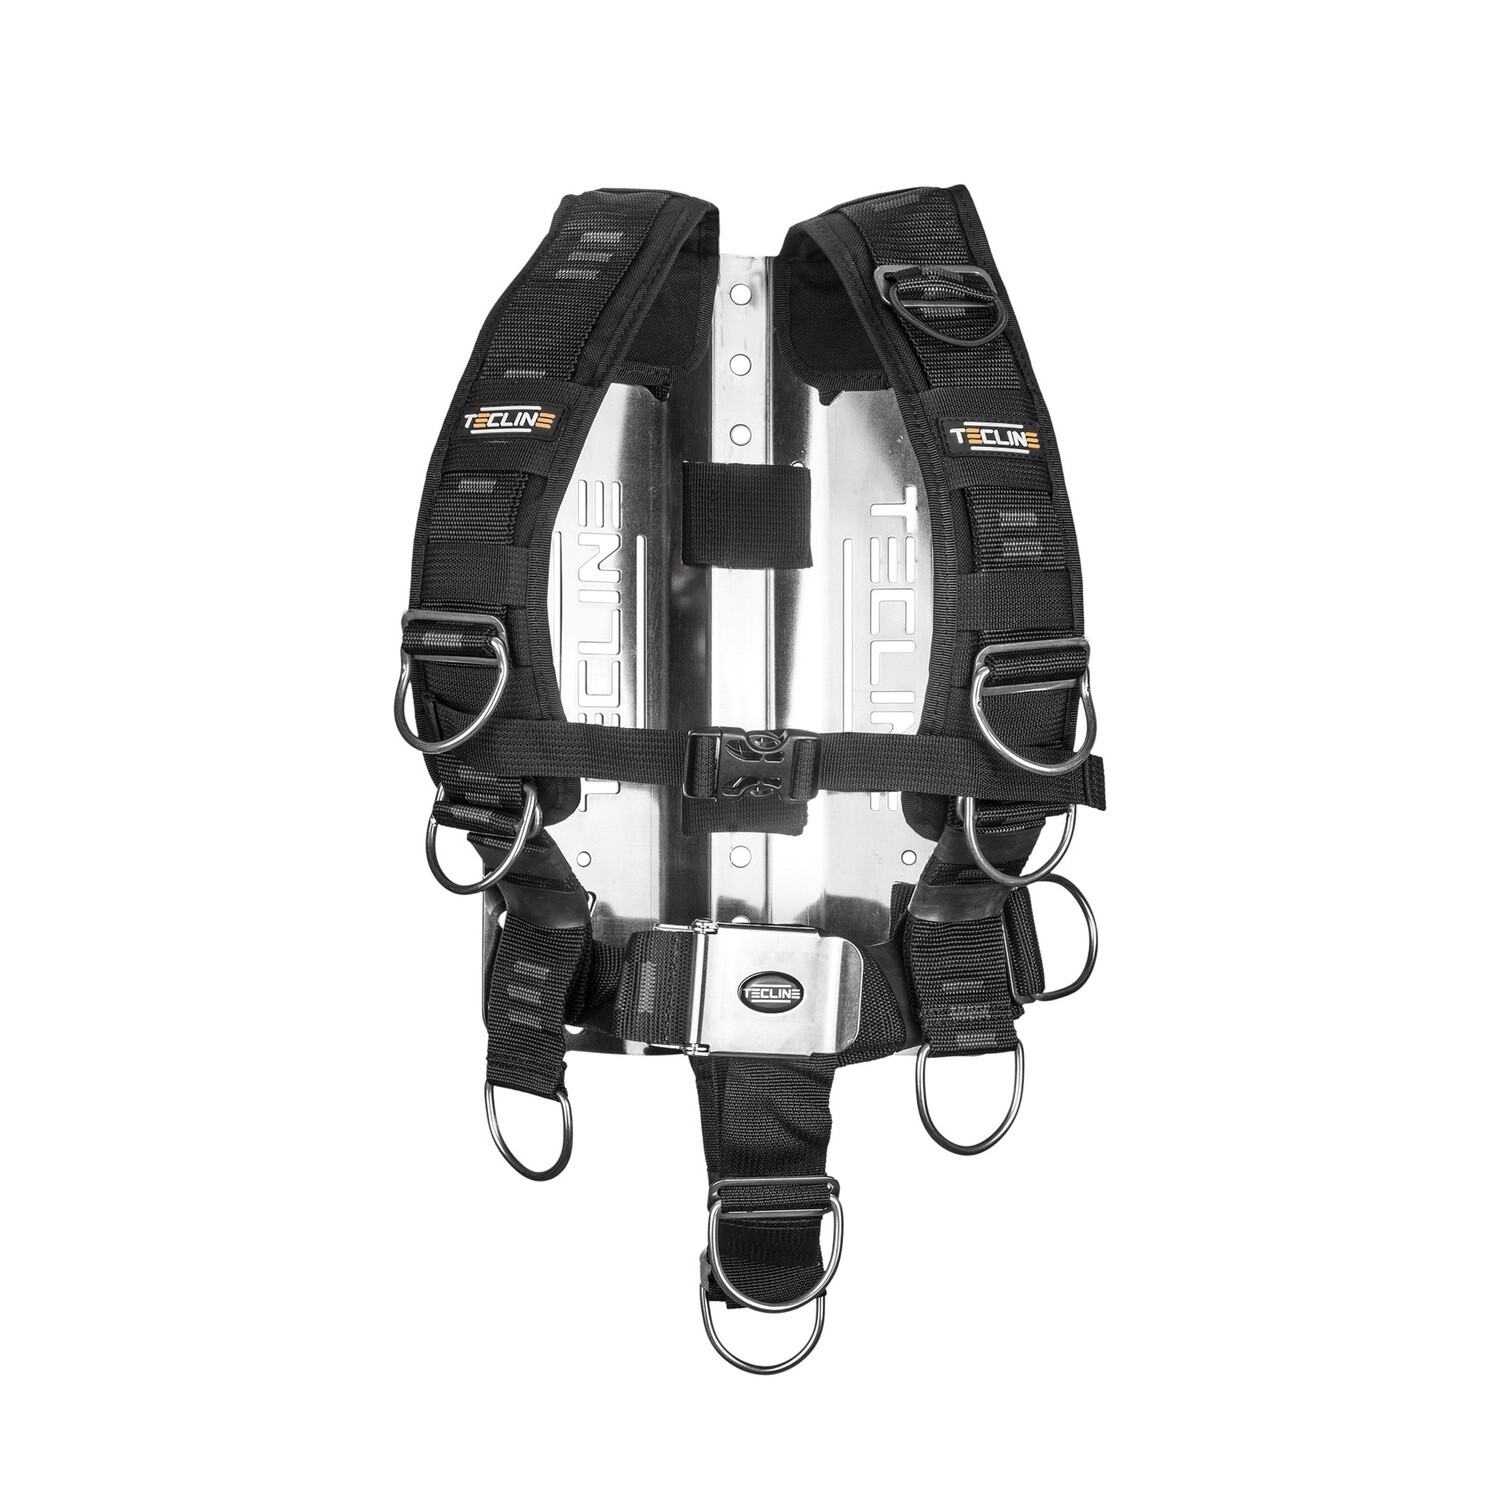 Harness COMFORT + back plate STAINLESS STEEL 3mm